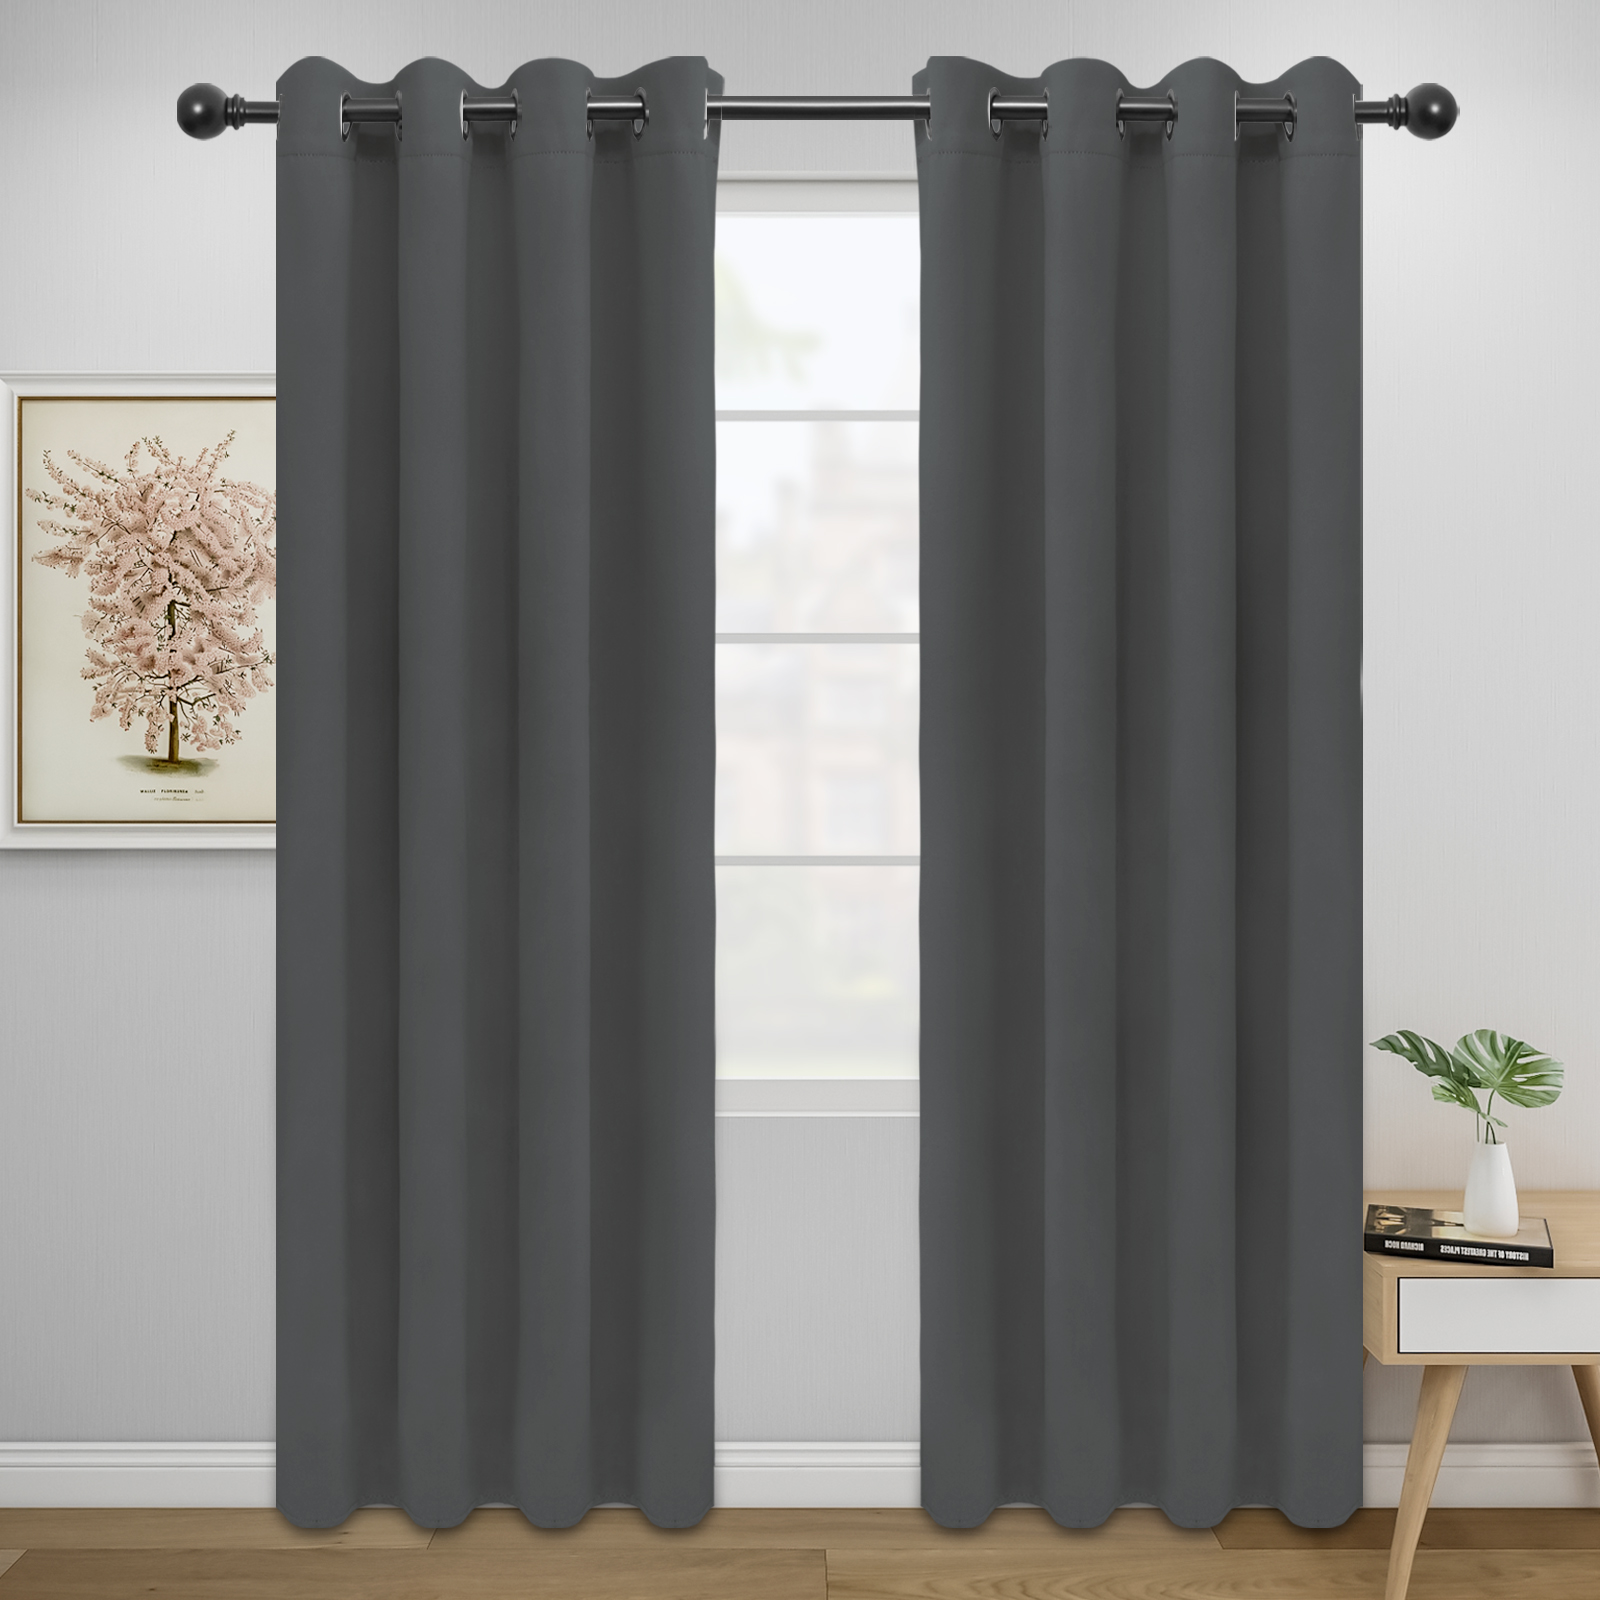 Easy-Going Thermal Insulated Blackout Curtains for Bedroom, Set of 2 Panels - image 1 of 7